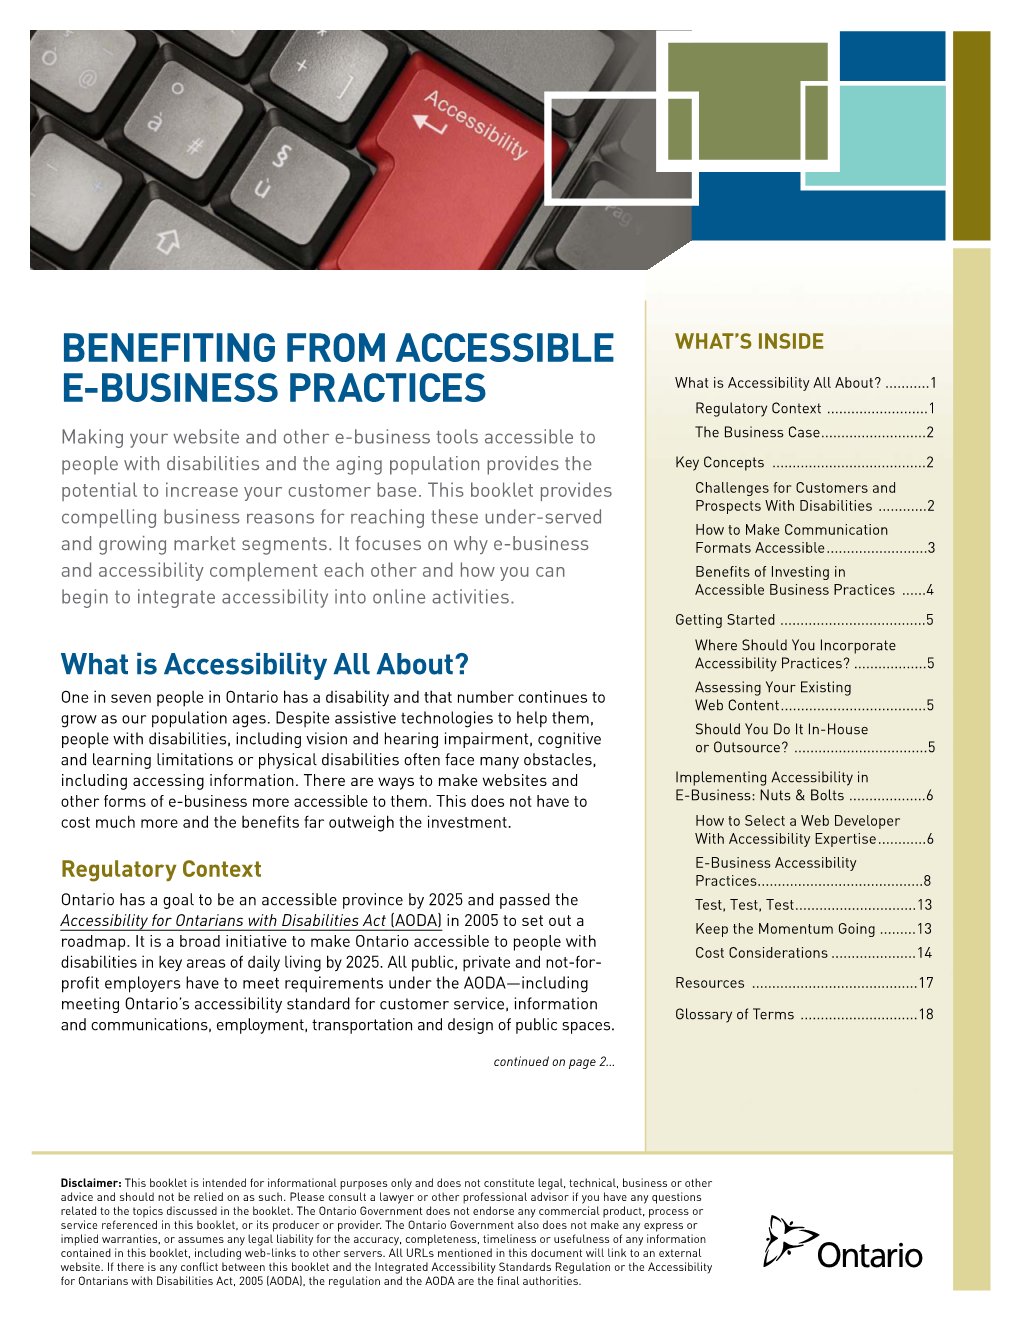 Benefitting from Accessible E-Business Practices